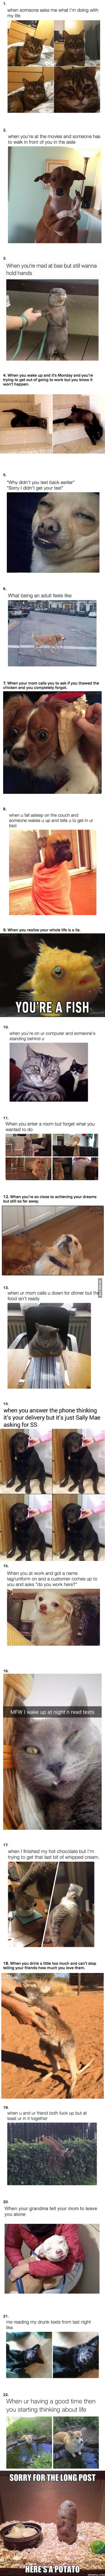 22 Animal Memes That Will Make You Laugh Harder Than They Probably Should